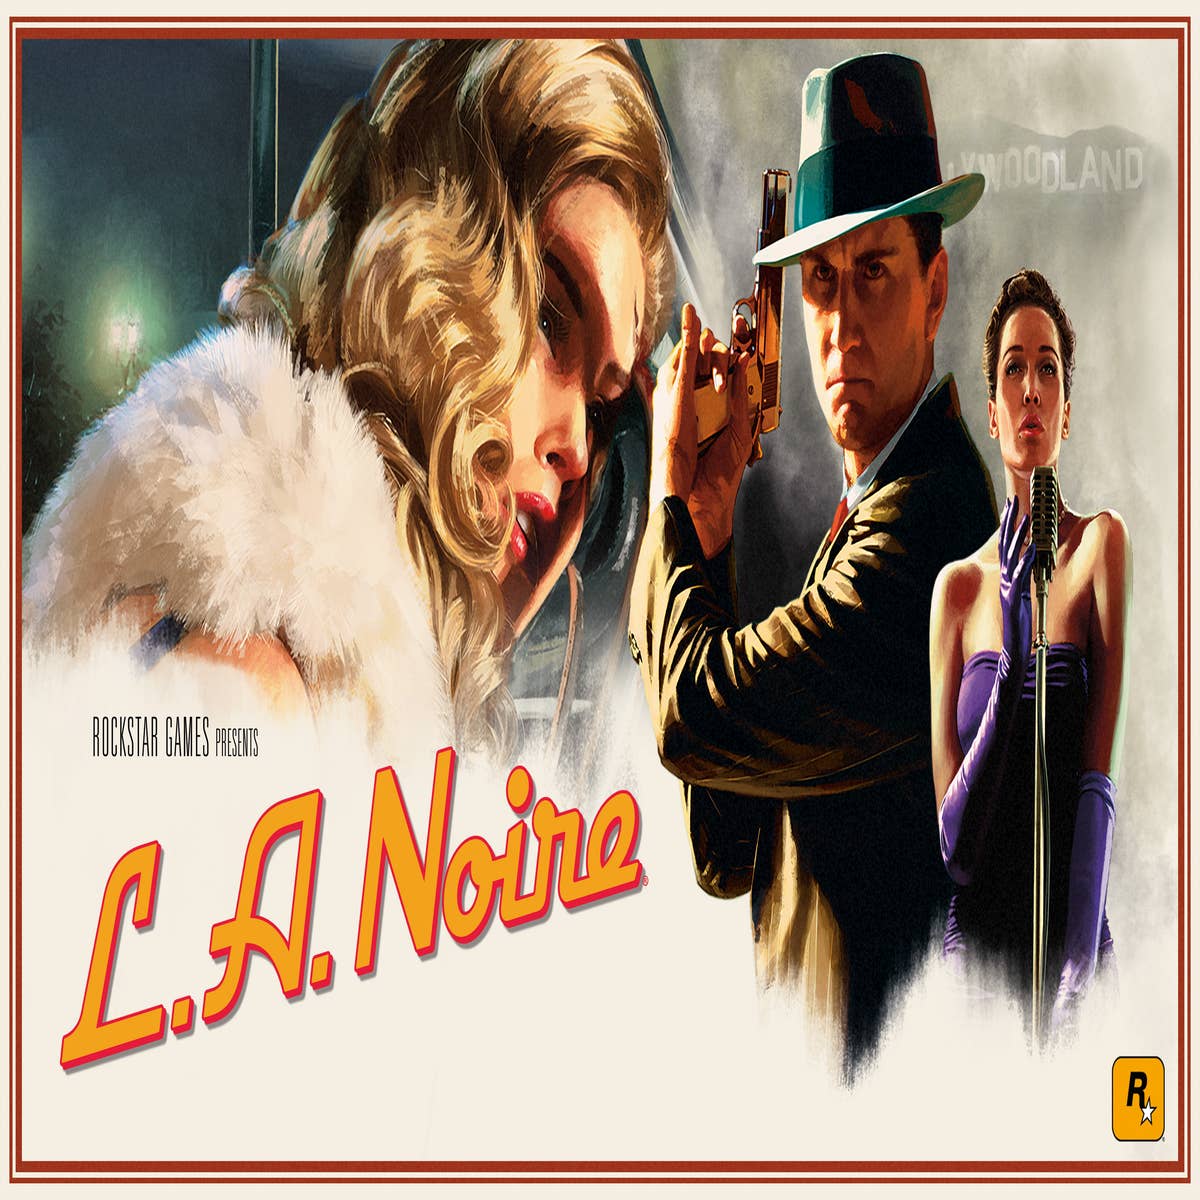 Downloaded LA noire from steamunlocked and it gets stuck on this